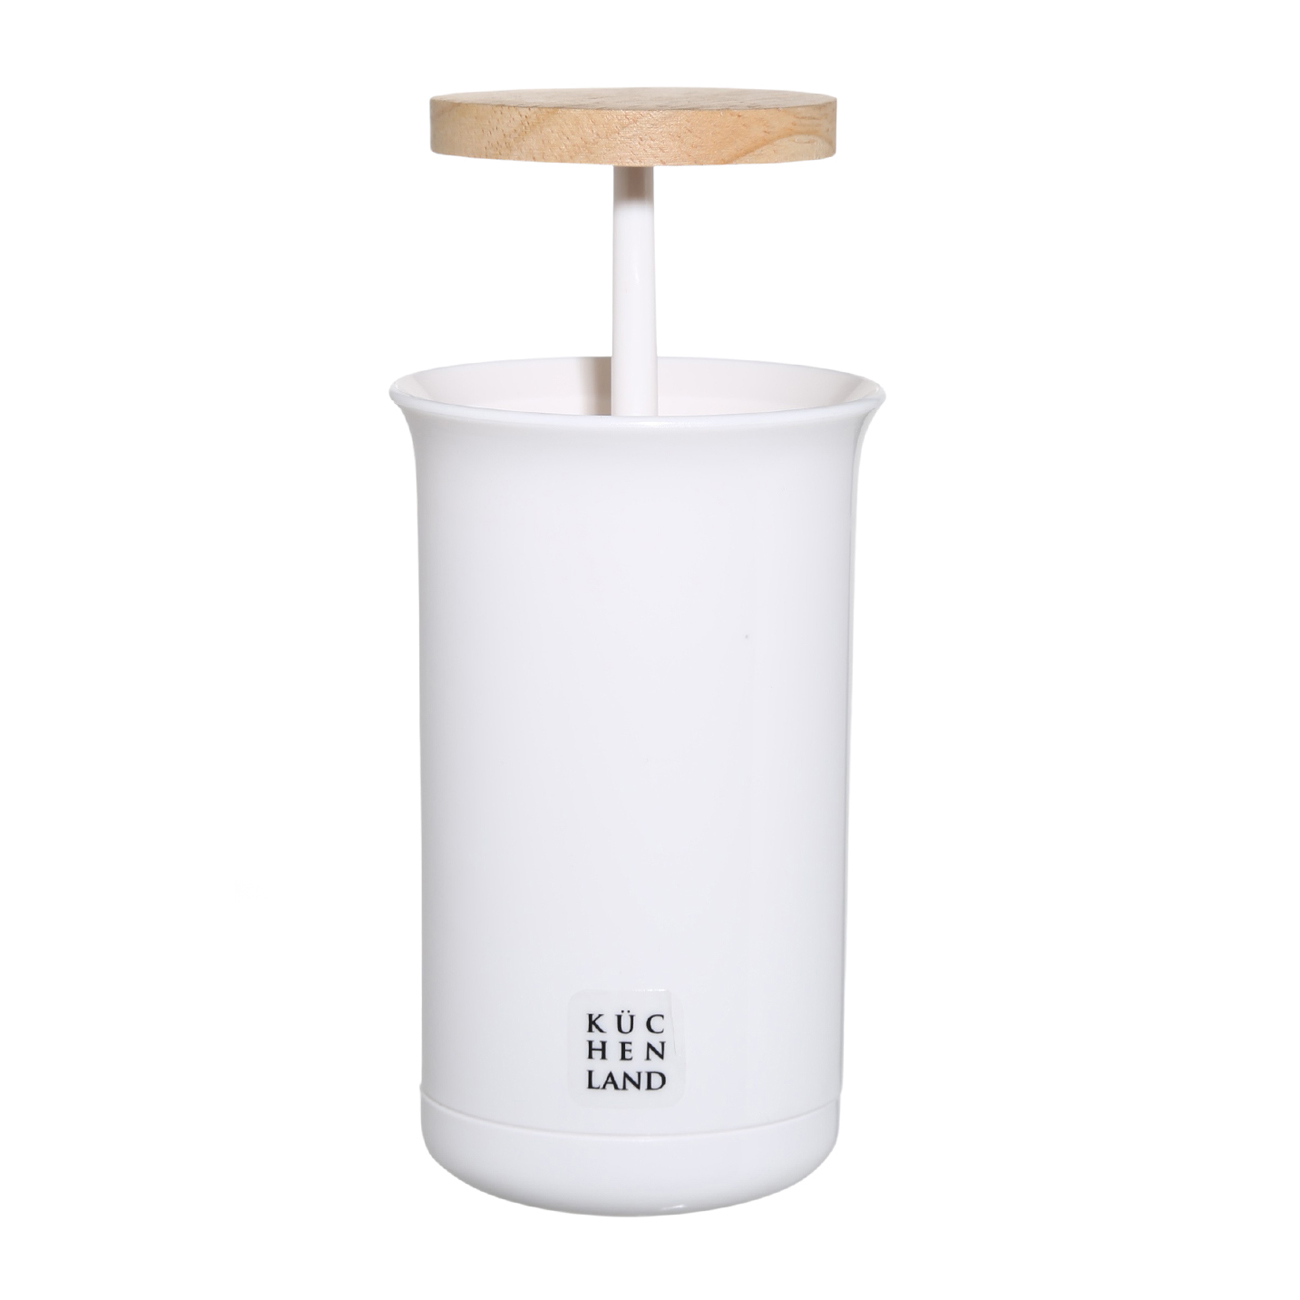 Toothpick container, 10 cm, plastic / rubber wood, White, White style изображение № 4